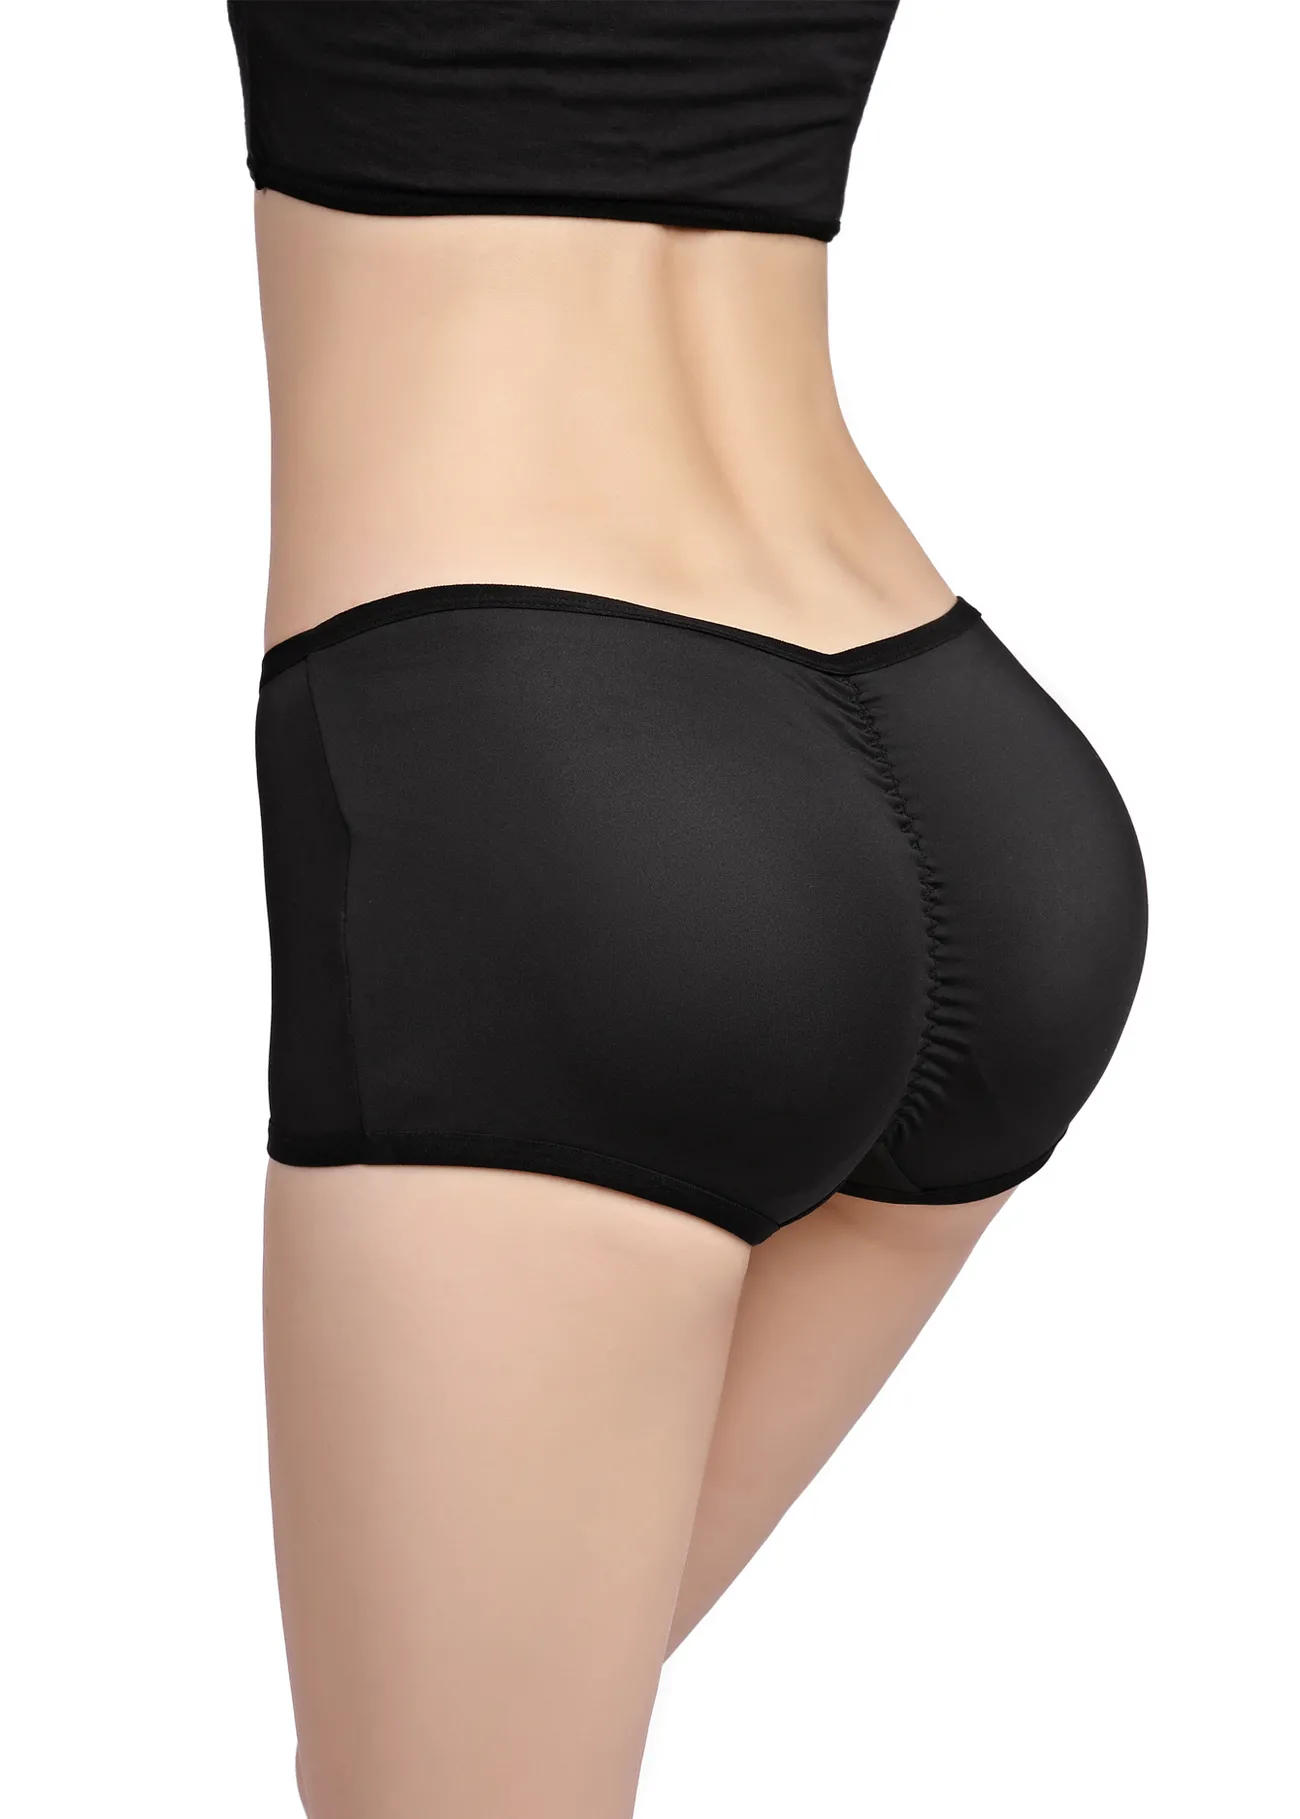 Women's * Butt Padded Adjustable Panties, Comfortable Butt Lifting Shorts,  High Coverage Women's Underwear & Lingerie